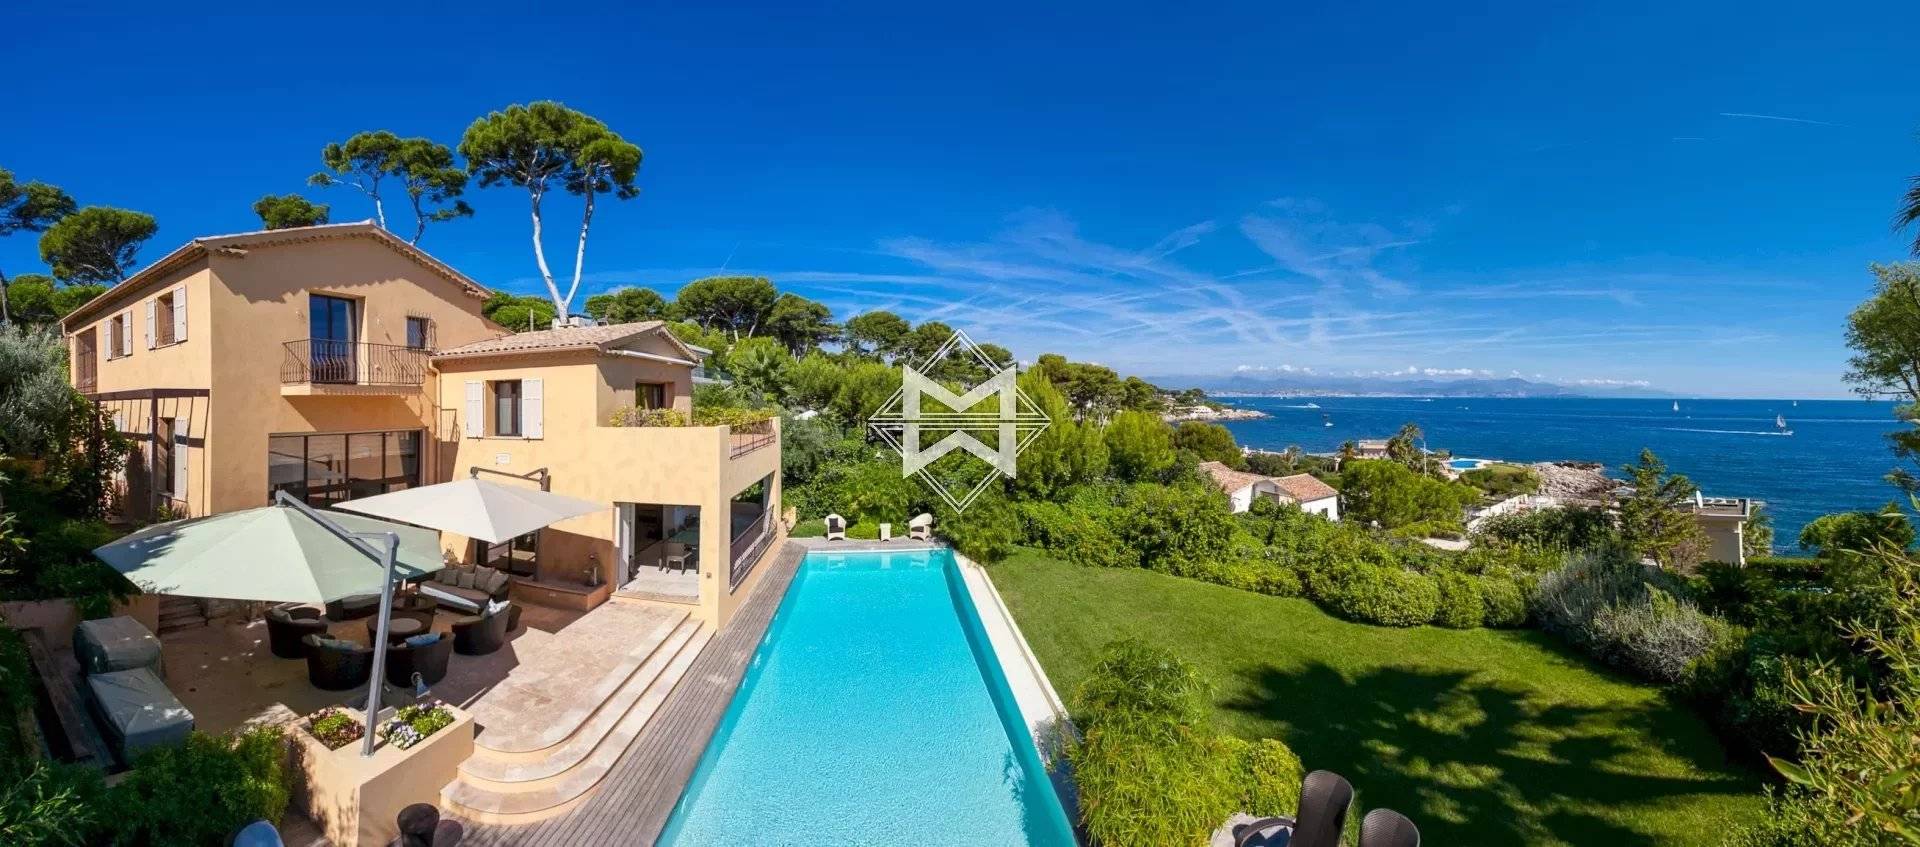 Splendid property with a sea view